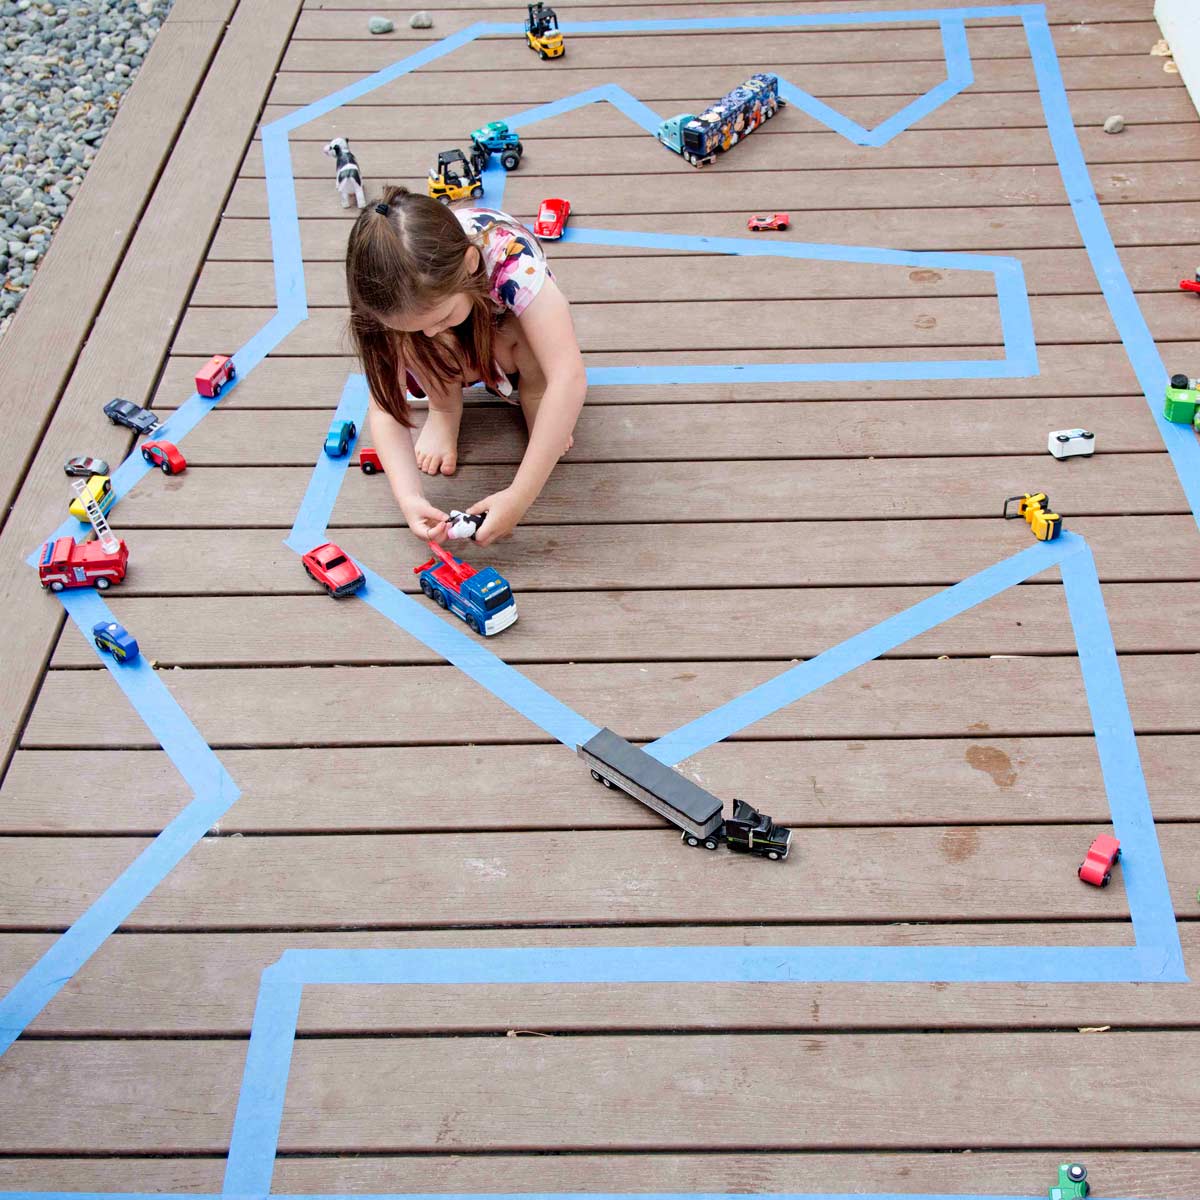 A child plays on an outdoor road made from painter's tape. There are small cars surrounding her.